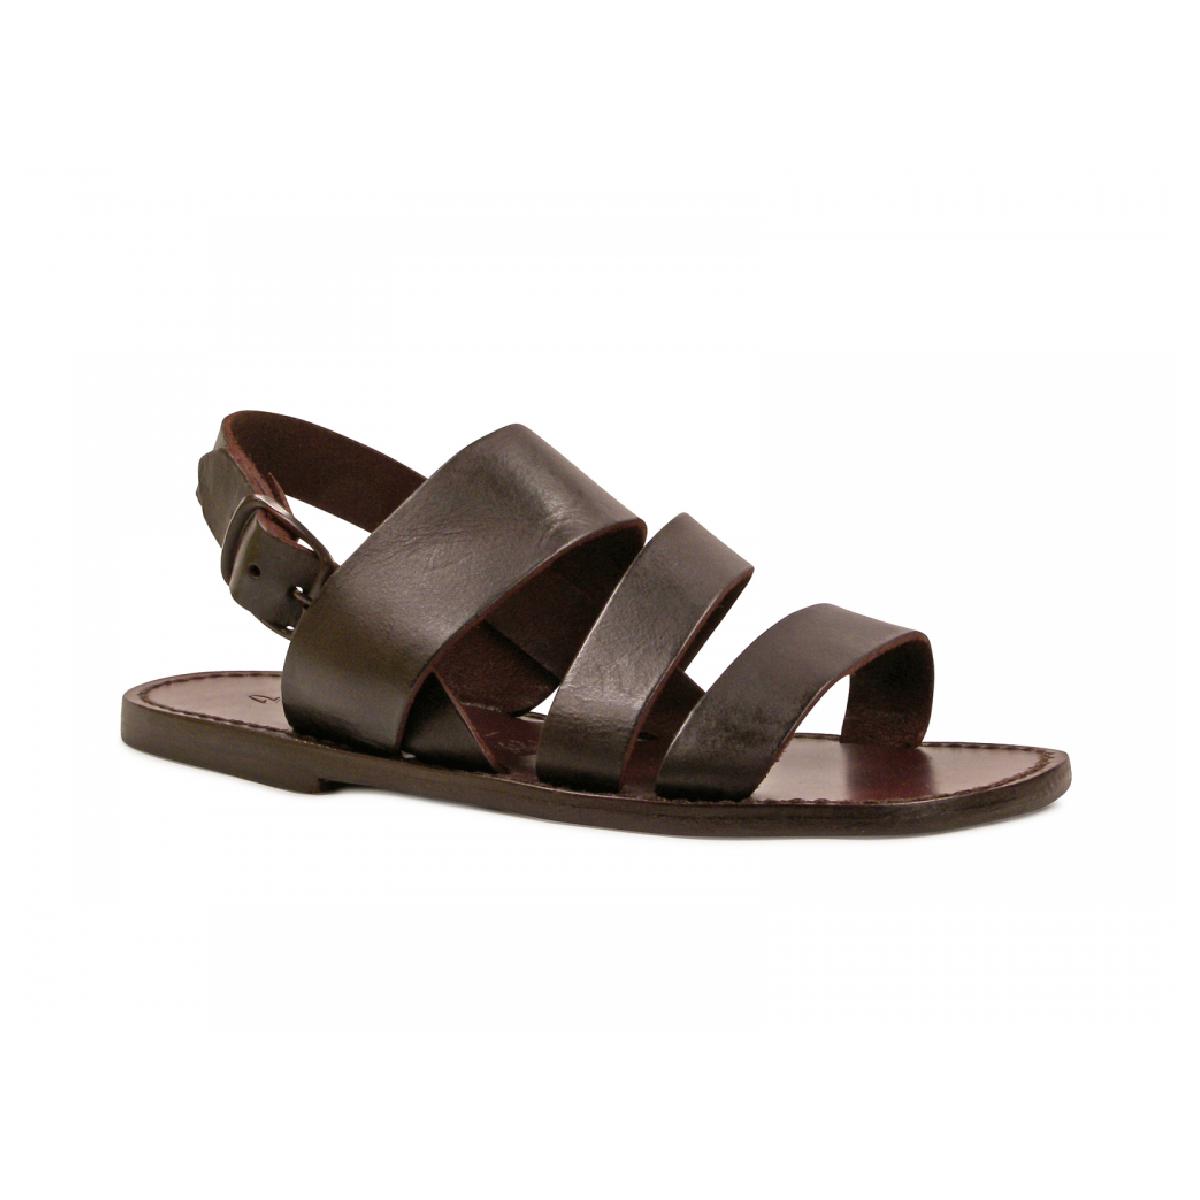 Brown Leather Sandals Handmade In Italy For Mens Gianluca The Leather Craftsman 